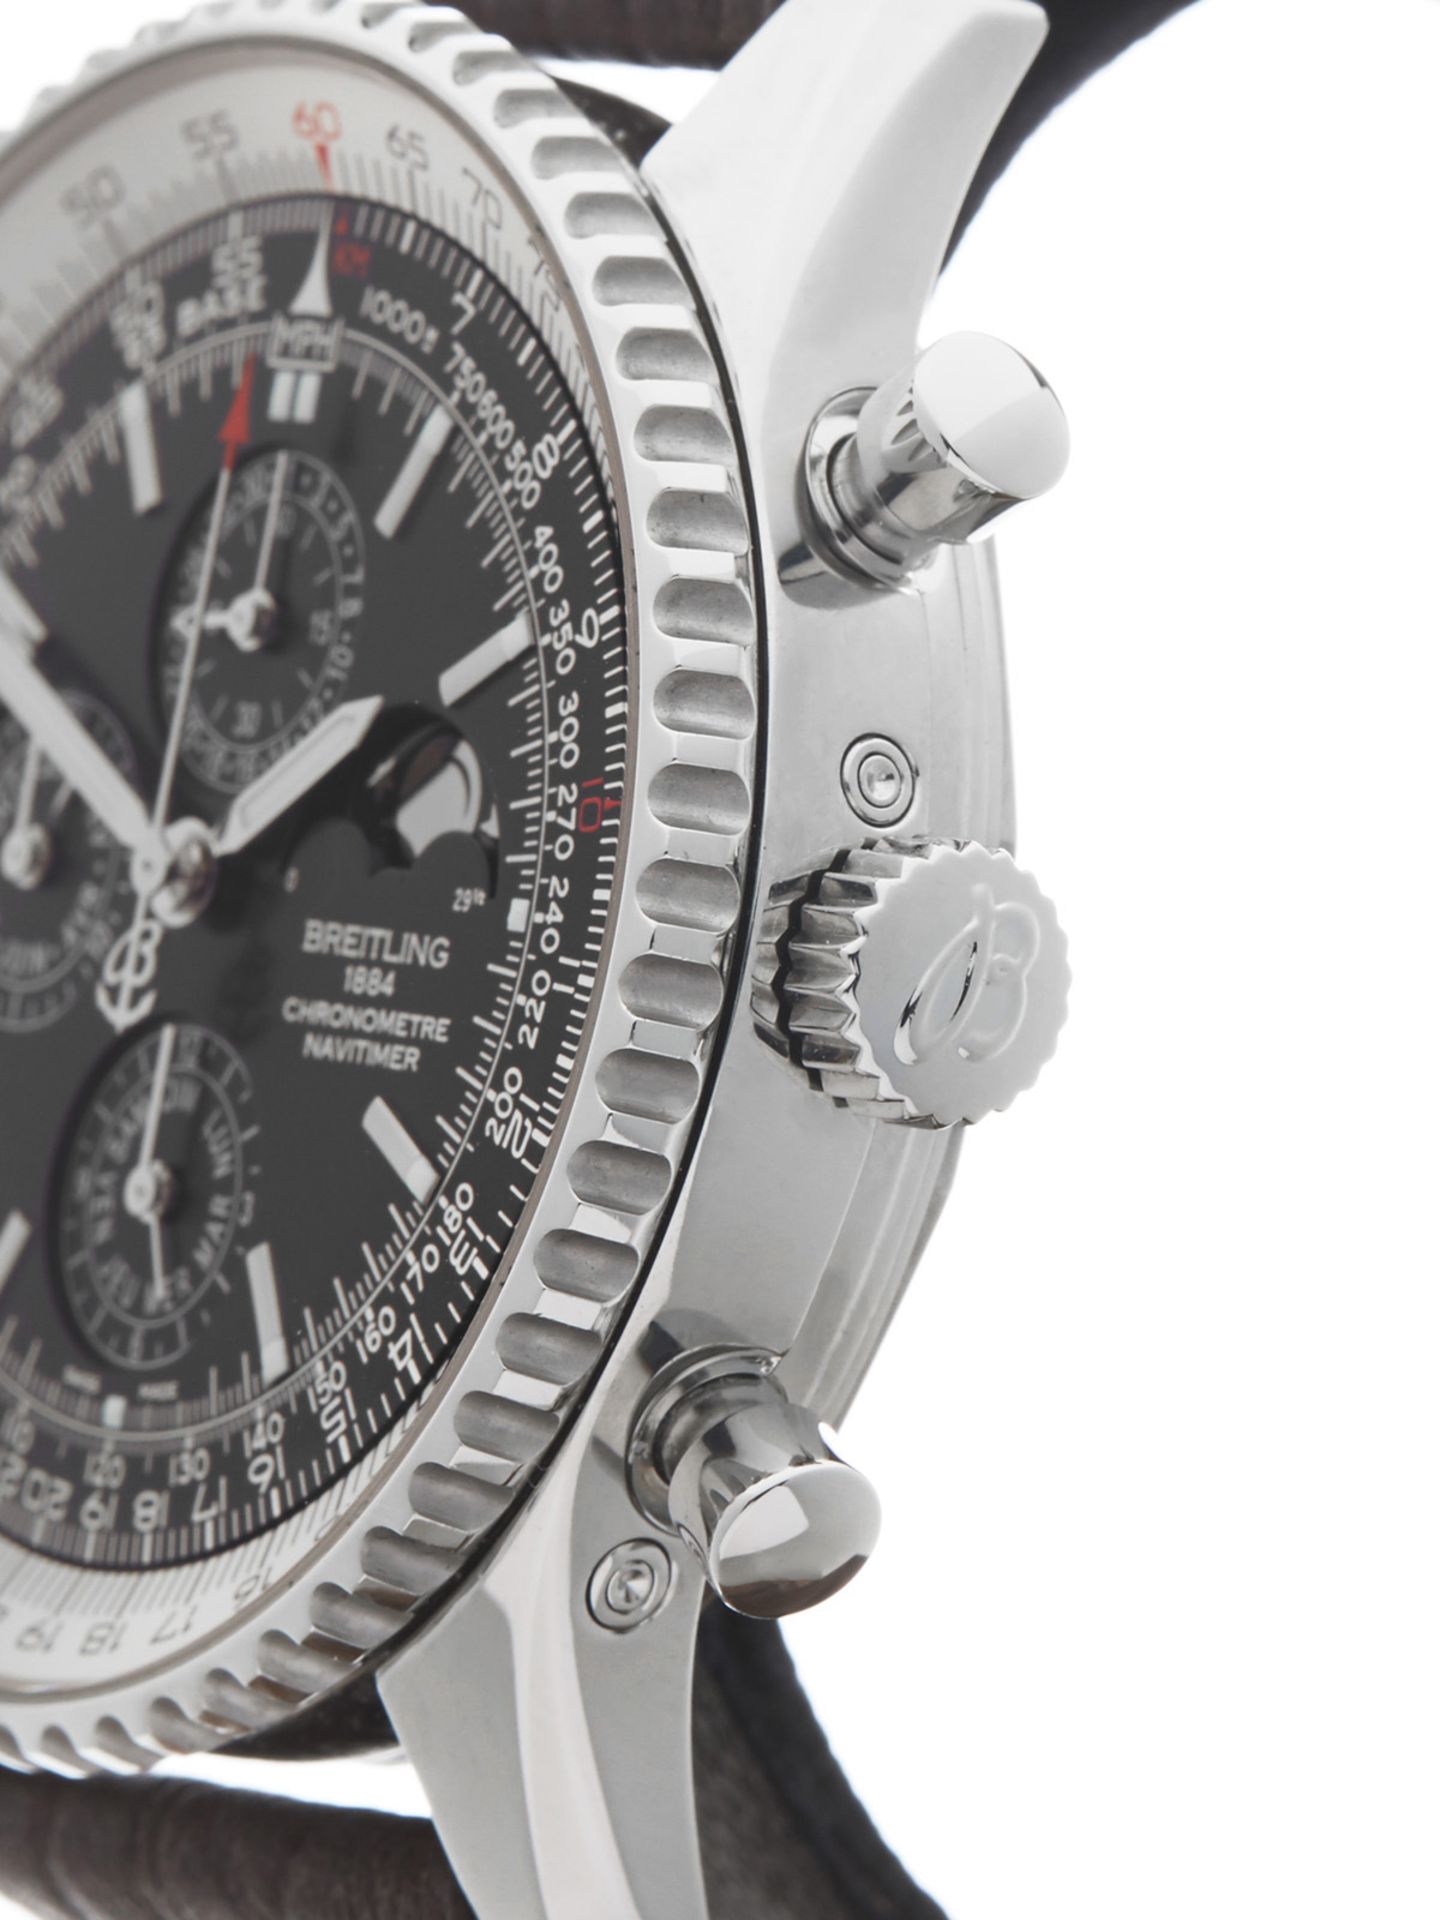 Breitling, Navitimer Chronograph 46mm Stainless Steel A19370 - Image 3 of 9